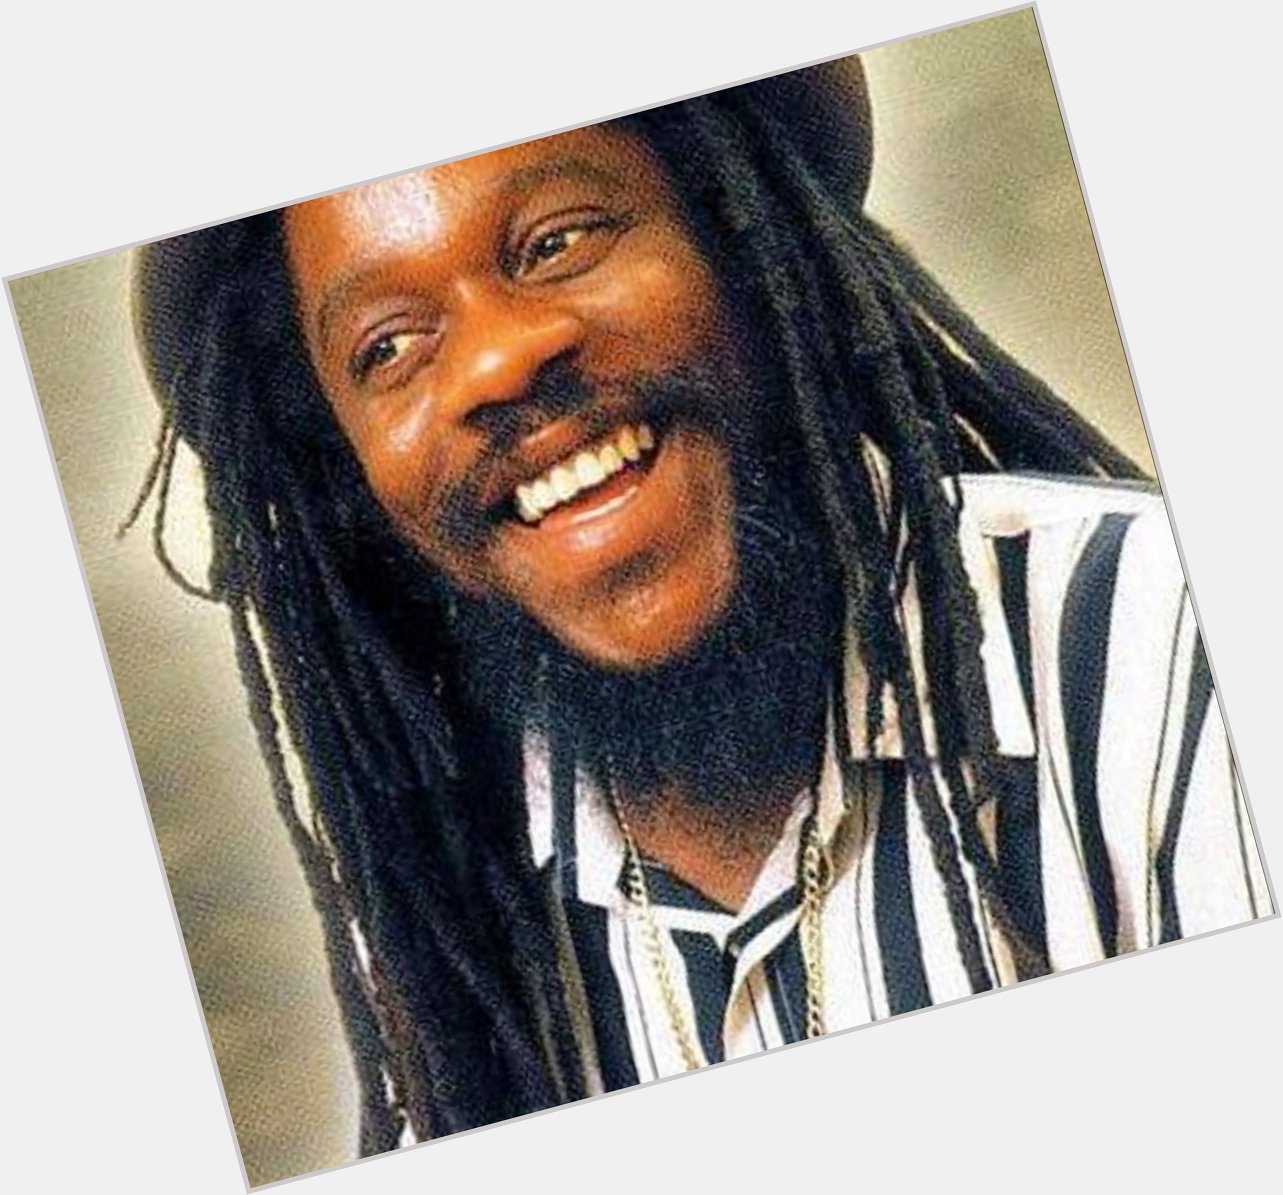 Happy Birthday to the Kingston King, Dennis Brown. Would have been 65 today. 